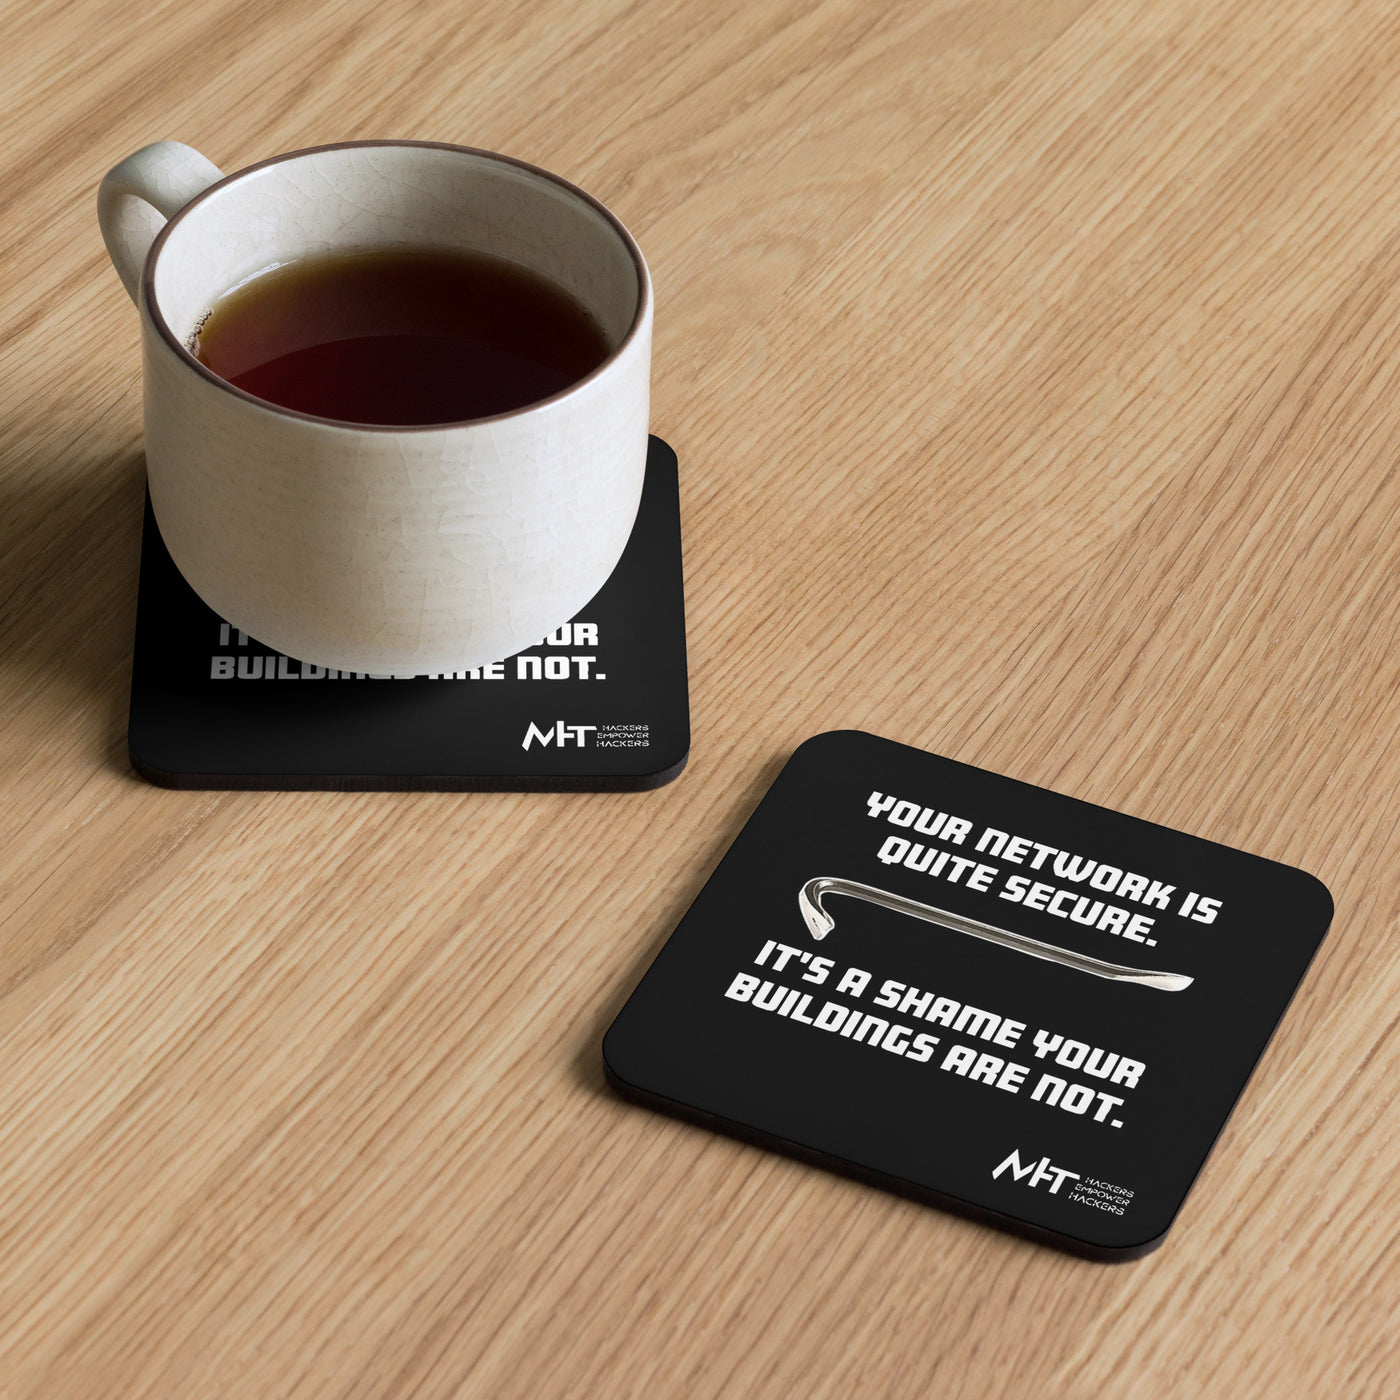 Your network is secure - Cork-back coaster